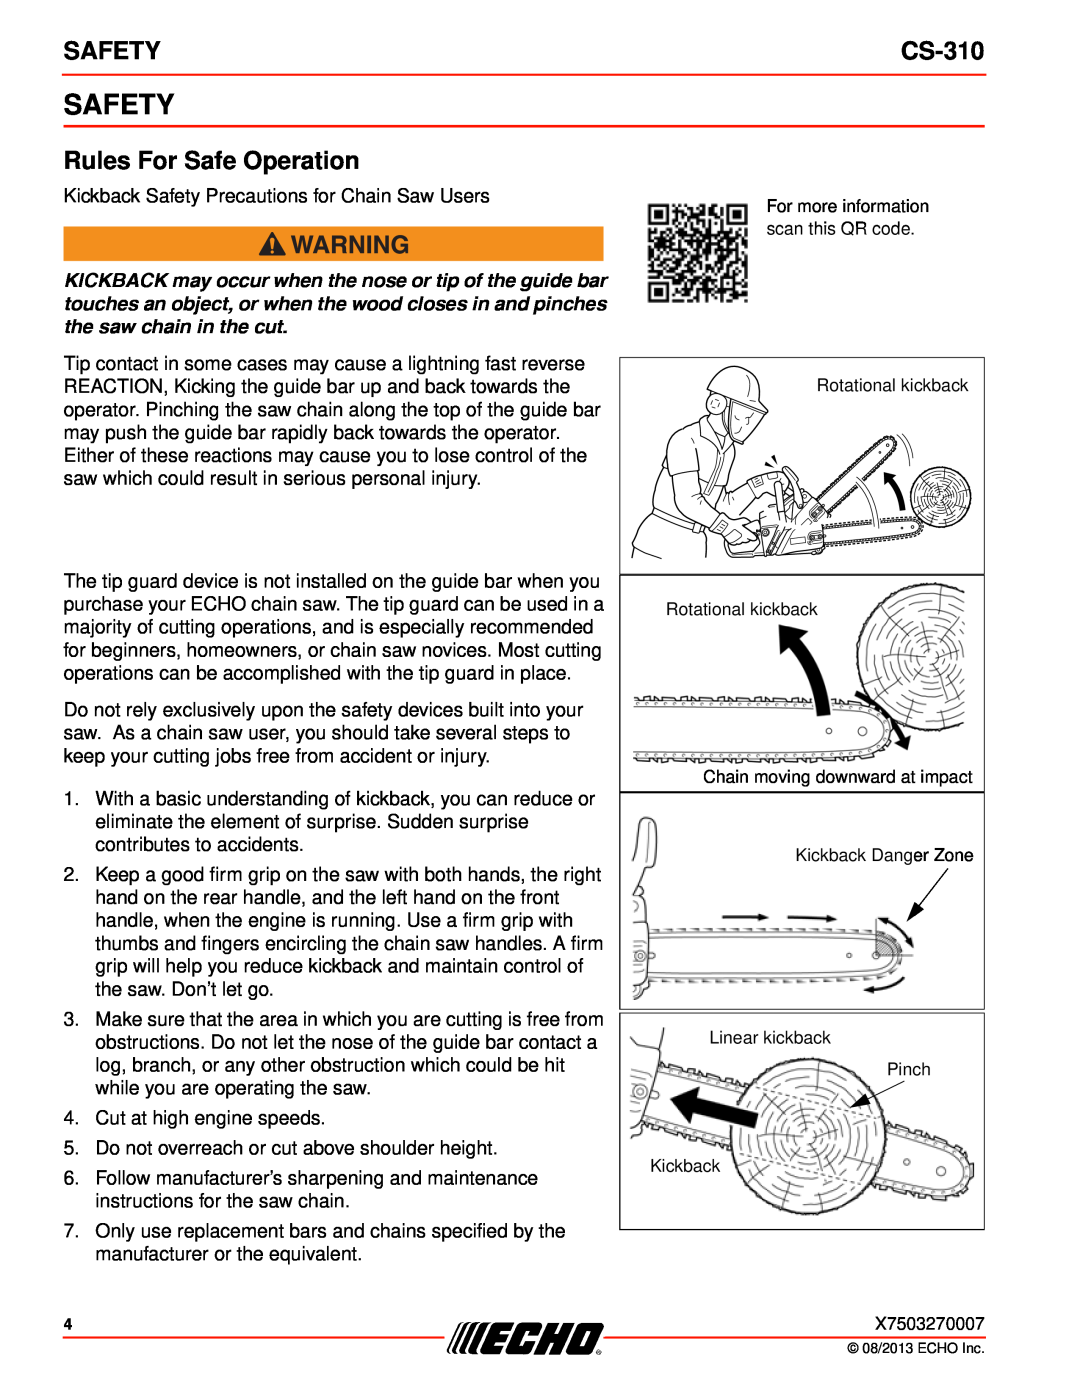 Echo CS-310 instruction manual Safety, Rules For Safe Operation 